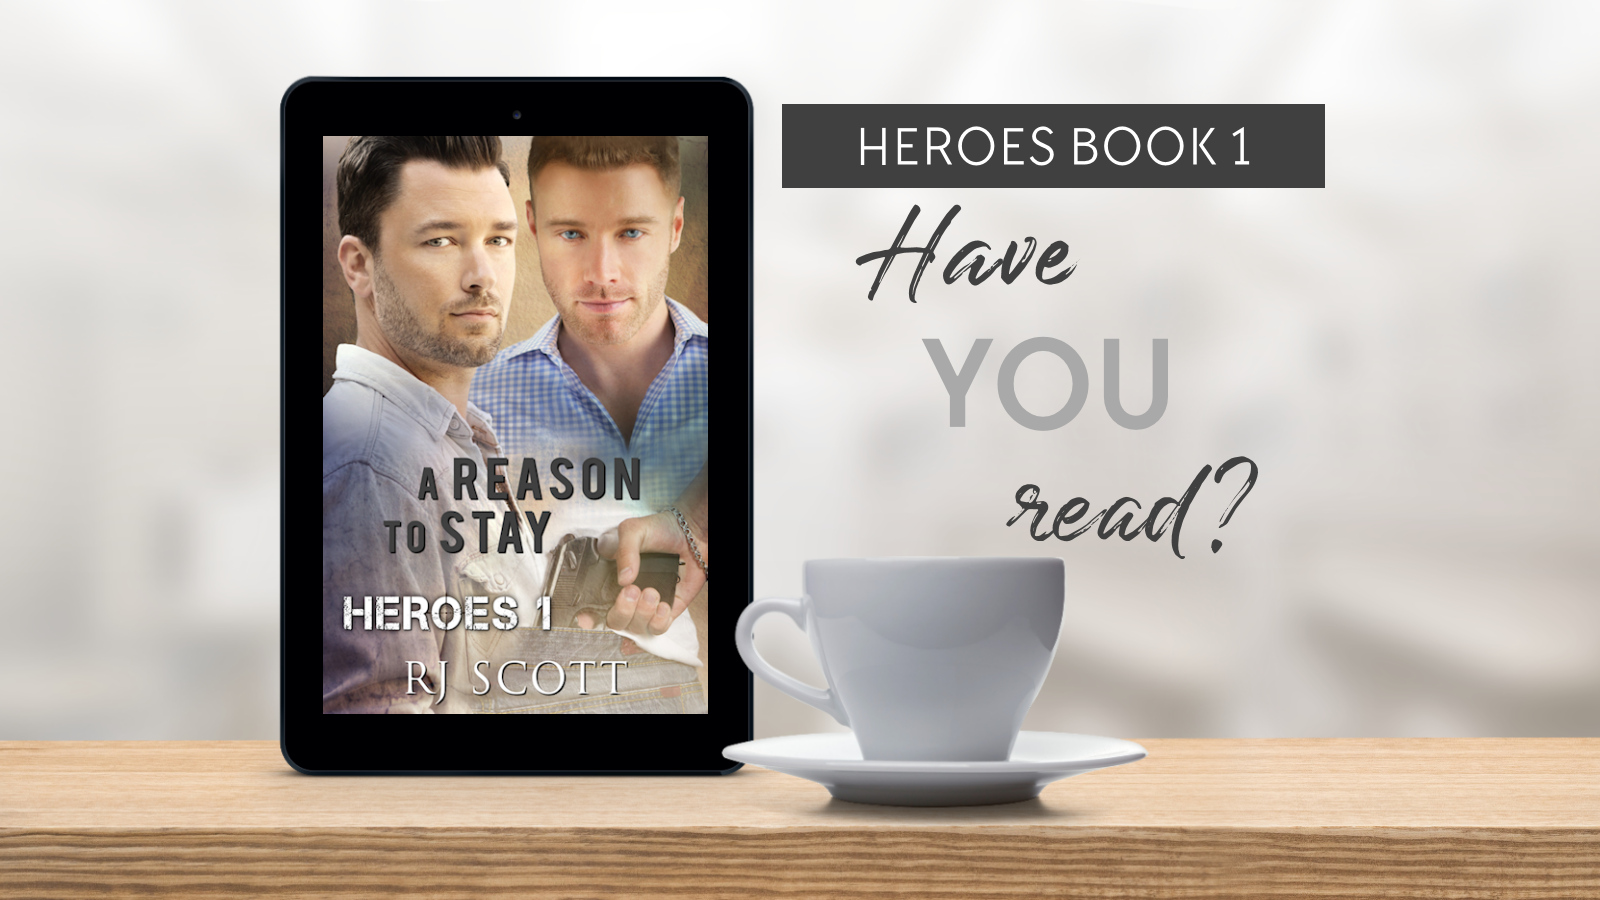 Have you read A Reason to Stay Heroes MMRomance RJ Scott